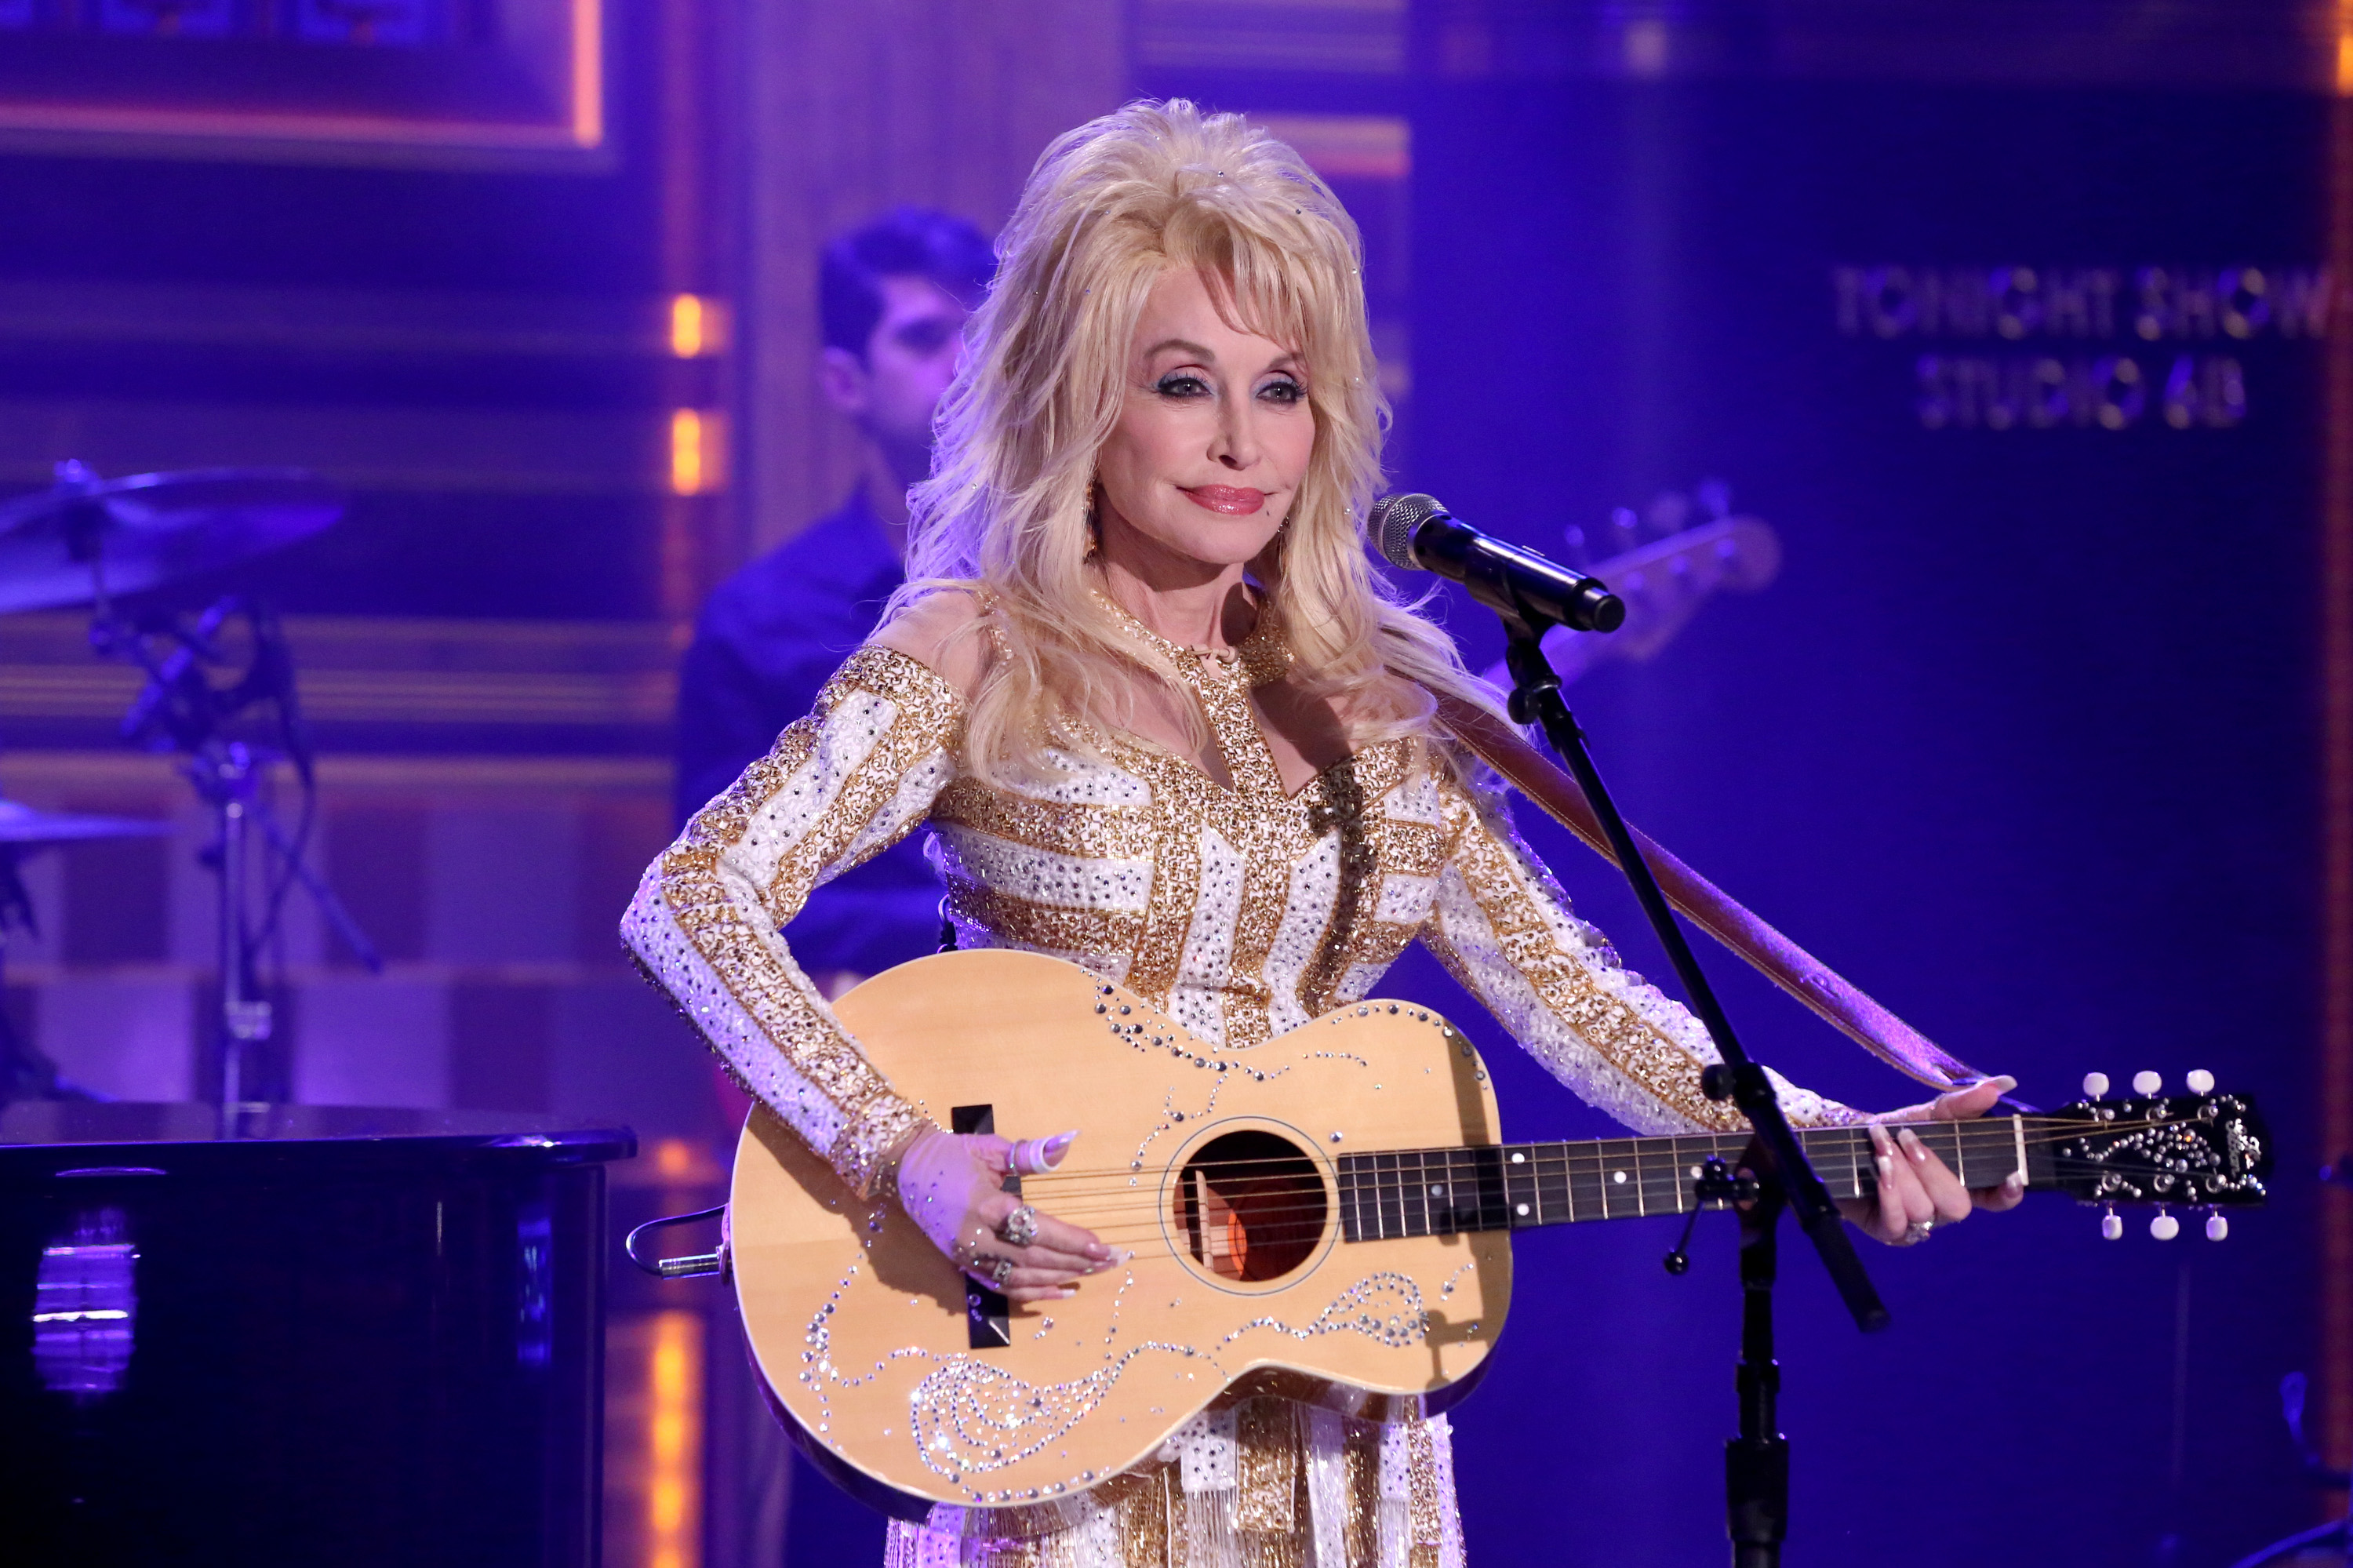 Dolly Parton wears gold and white while playing the guitar. 